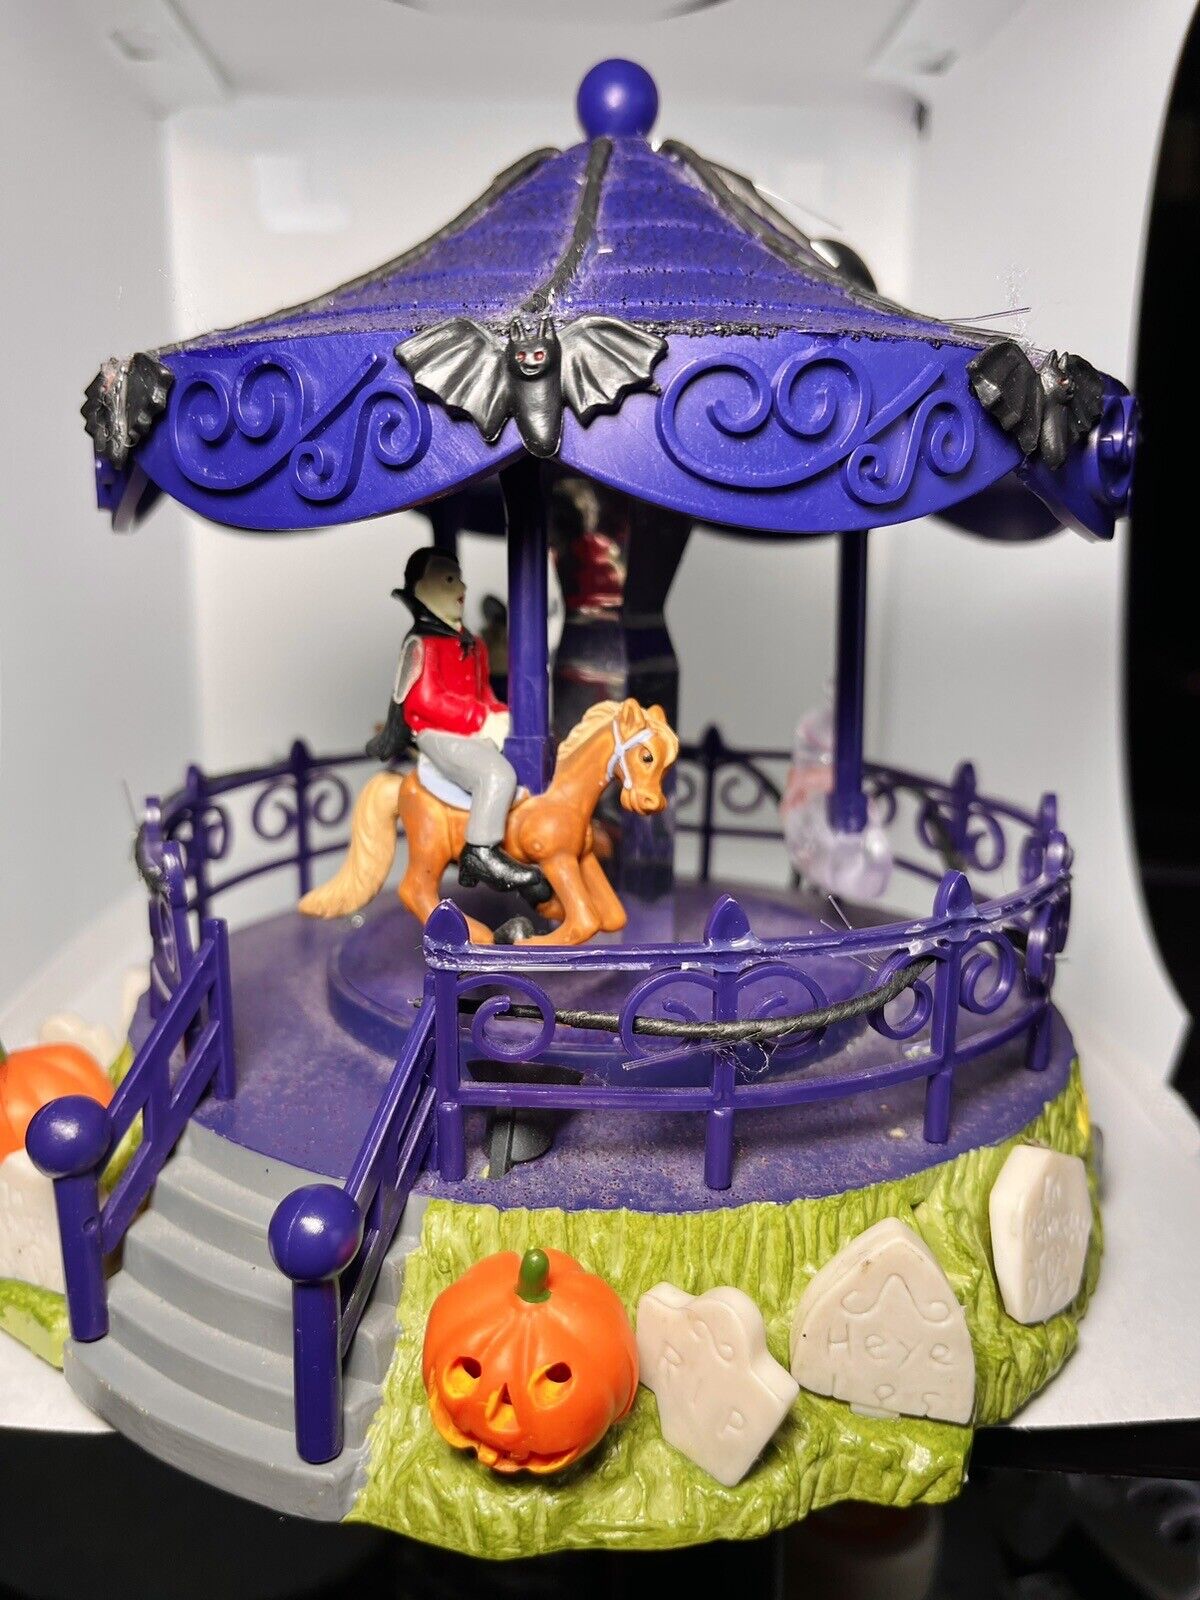 2008 AVON HALLOWEEN Light Up Moving CAROUSEL With GHOULS AND SPOOKY SOUNDS